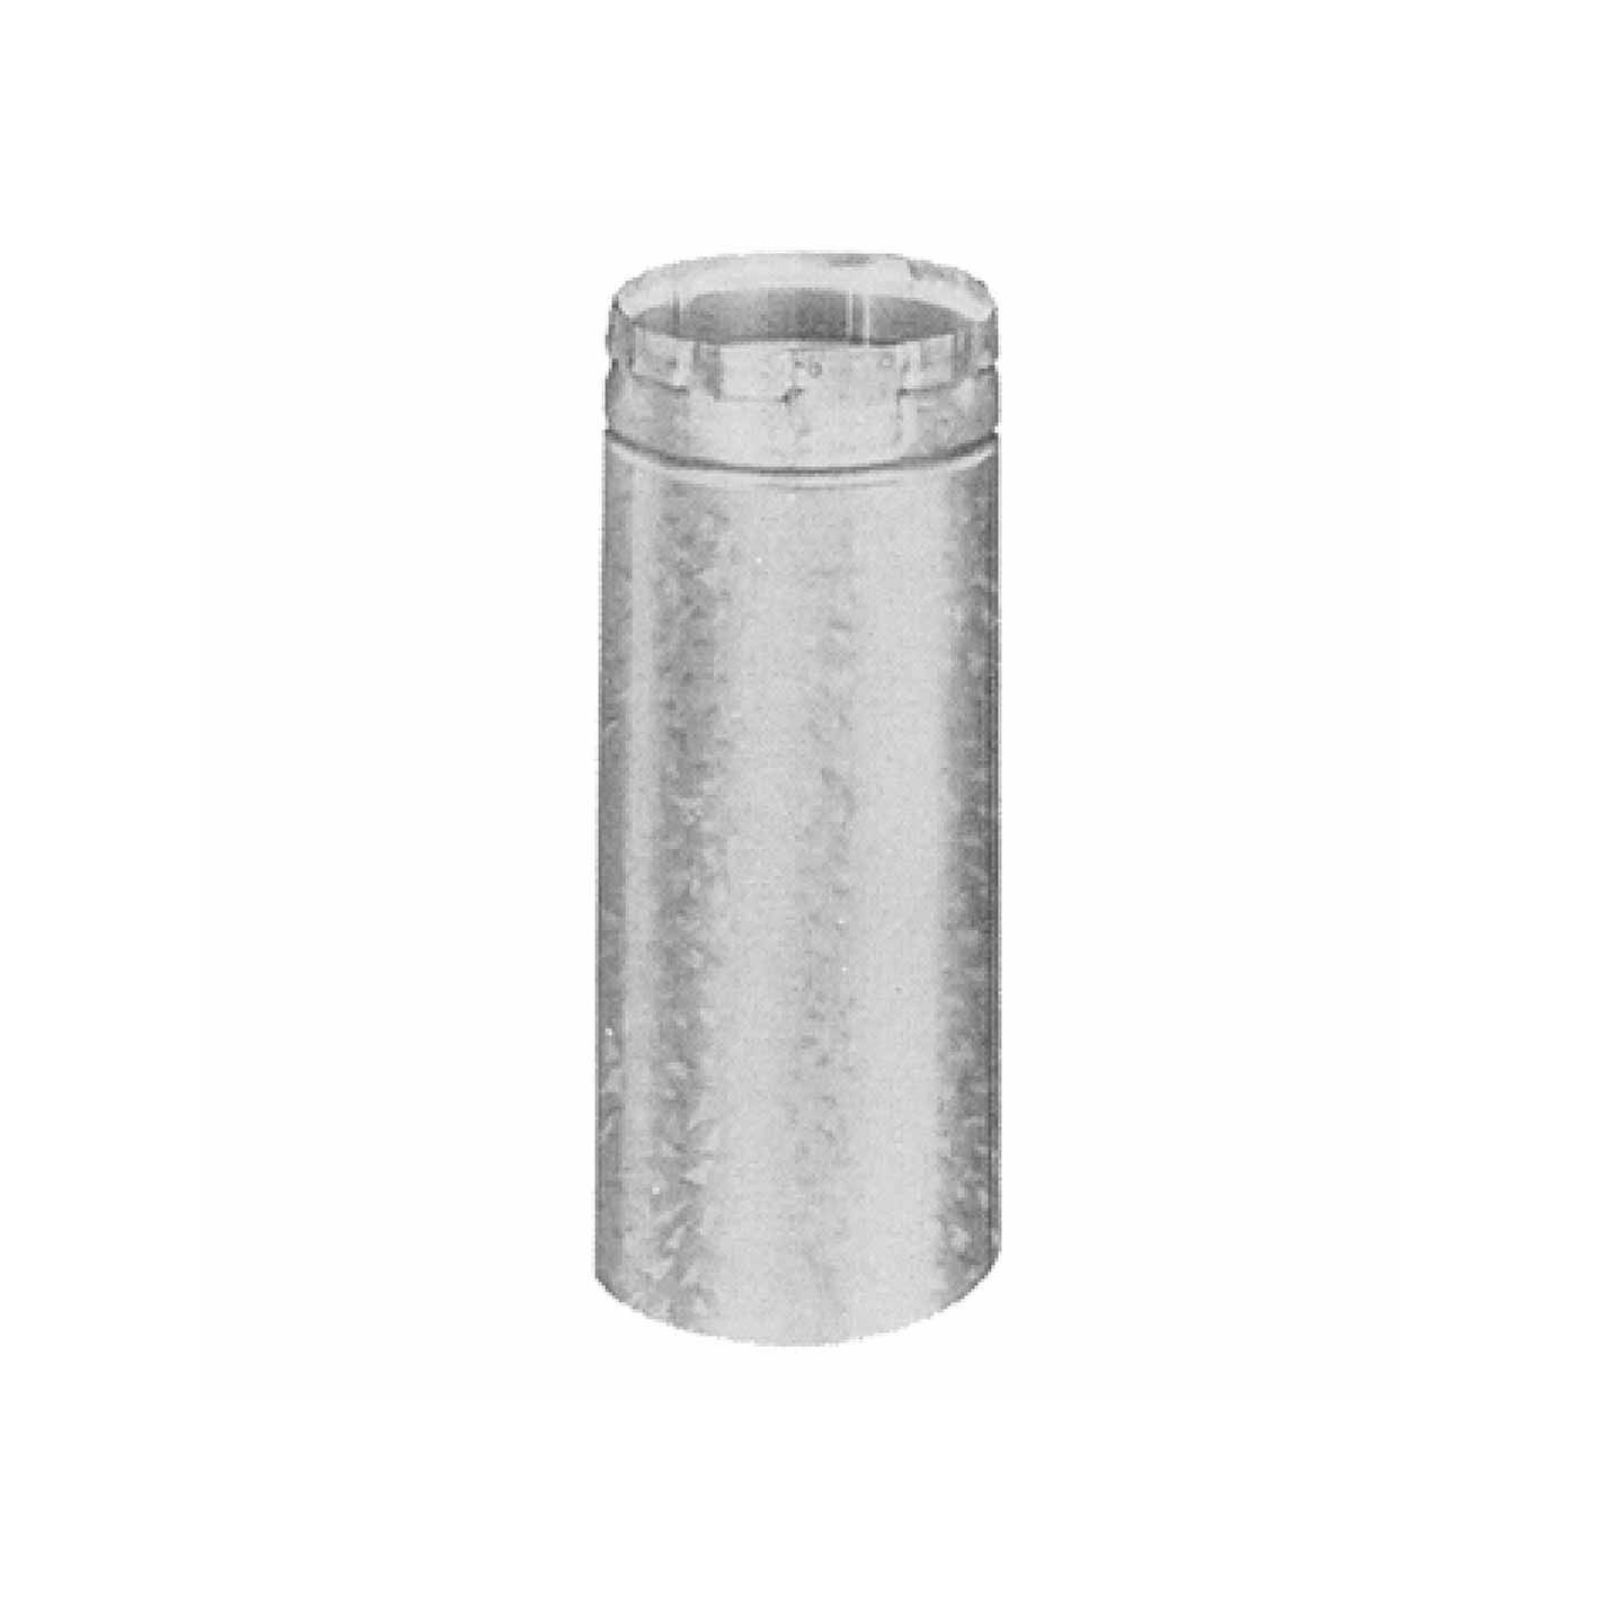 AmeriVent 3E12A - Adjustable Pipe Section Type B Gas Vent, 3" Round X 12" Length